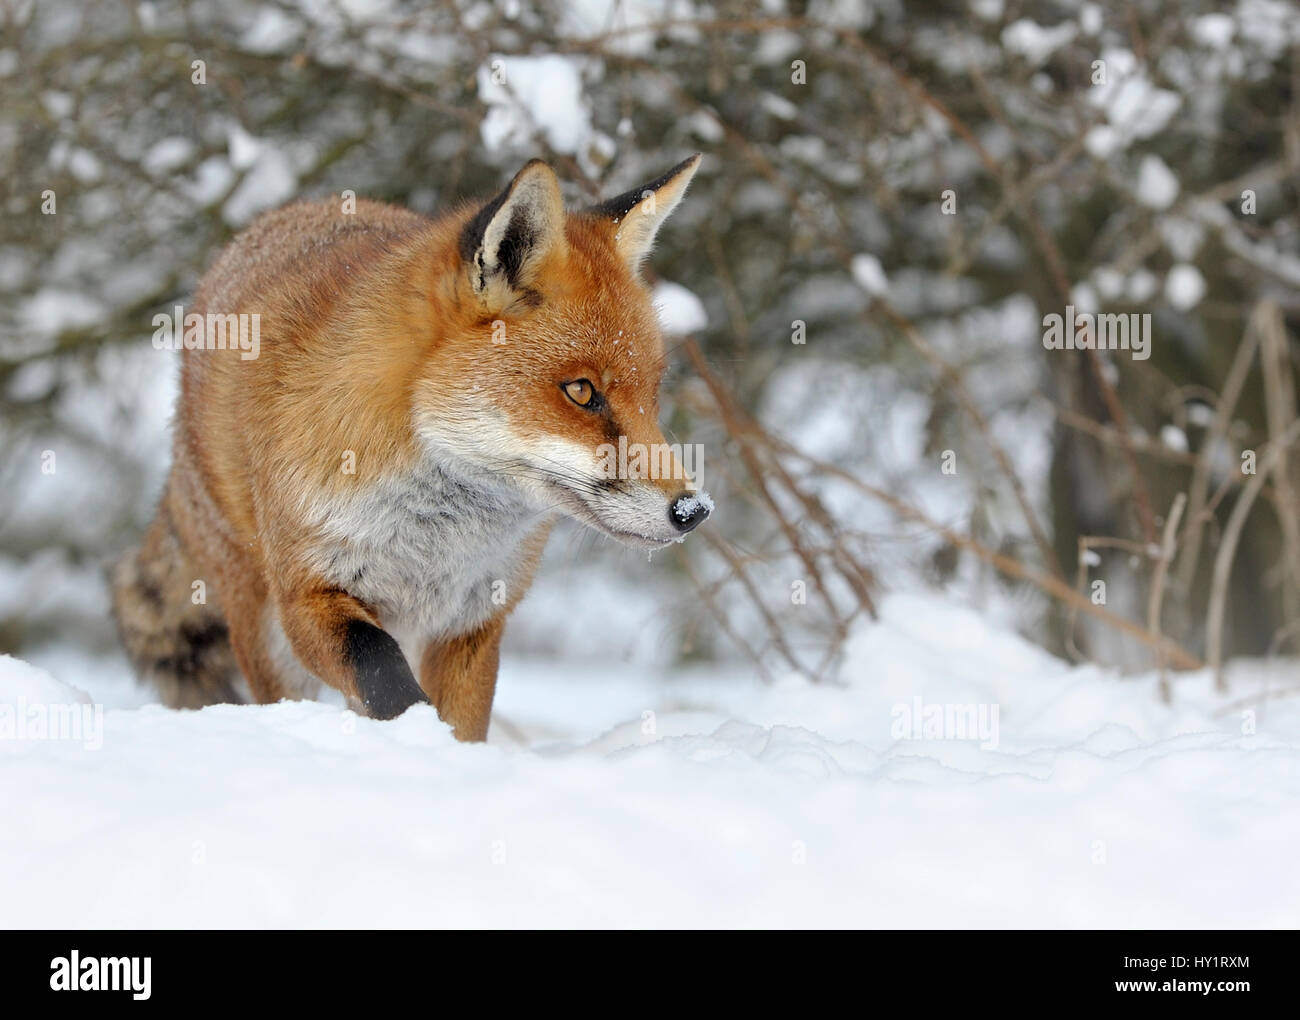 Rosso europeo volpe (Vulpes vulpes) nella neve, UK, captive. Foto Stock